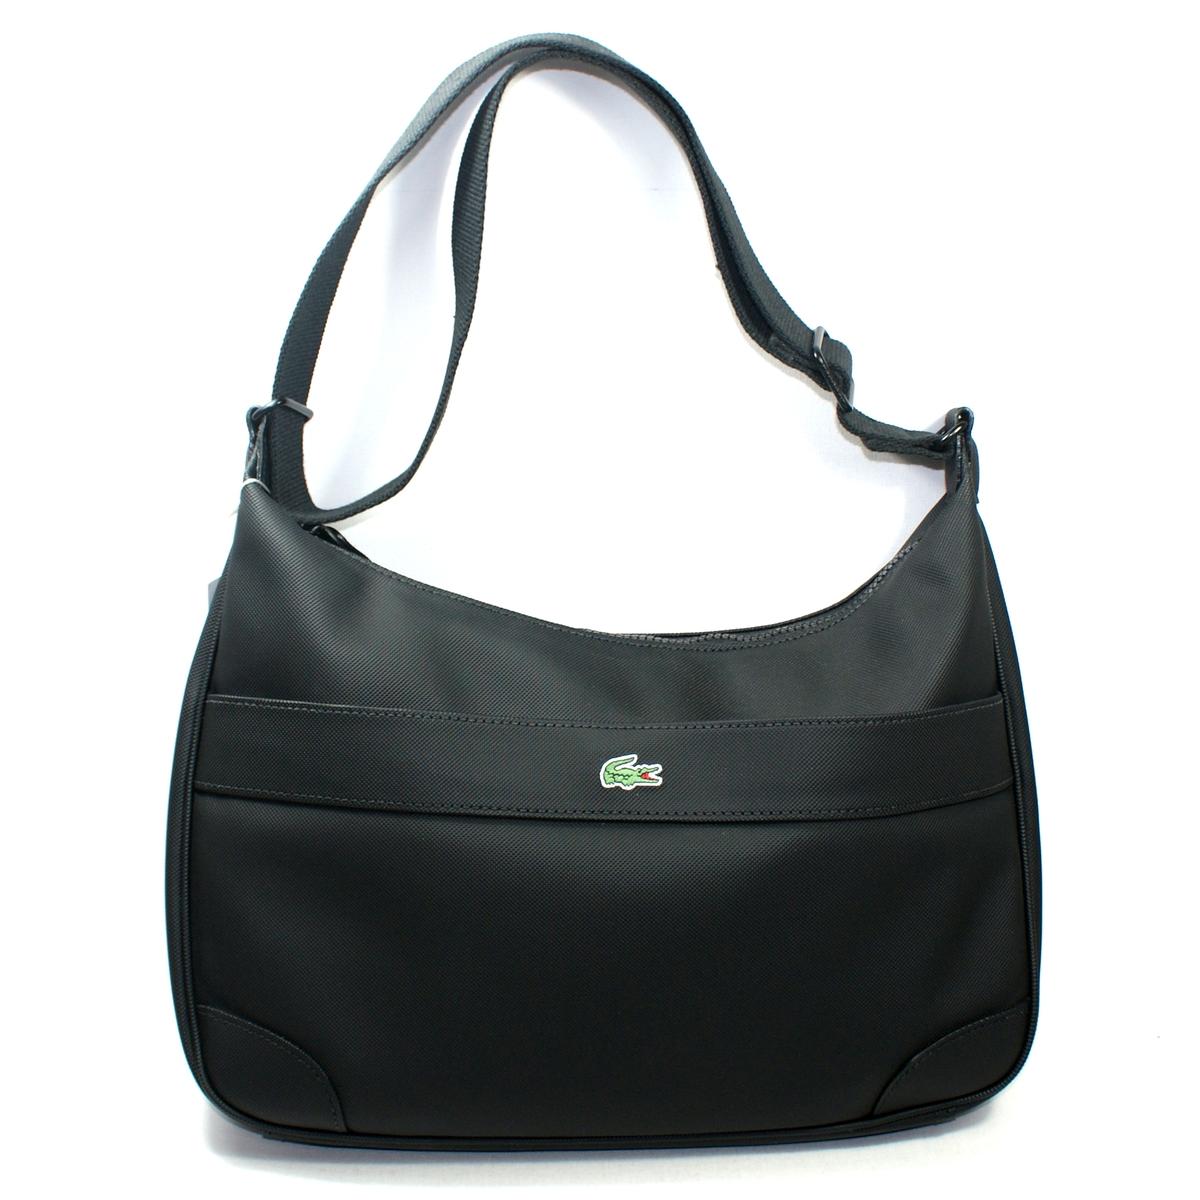 lacoste hobo bag off 73% - online-sms.in